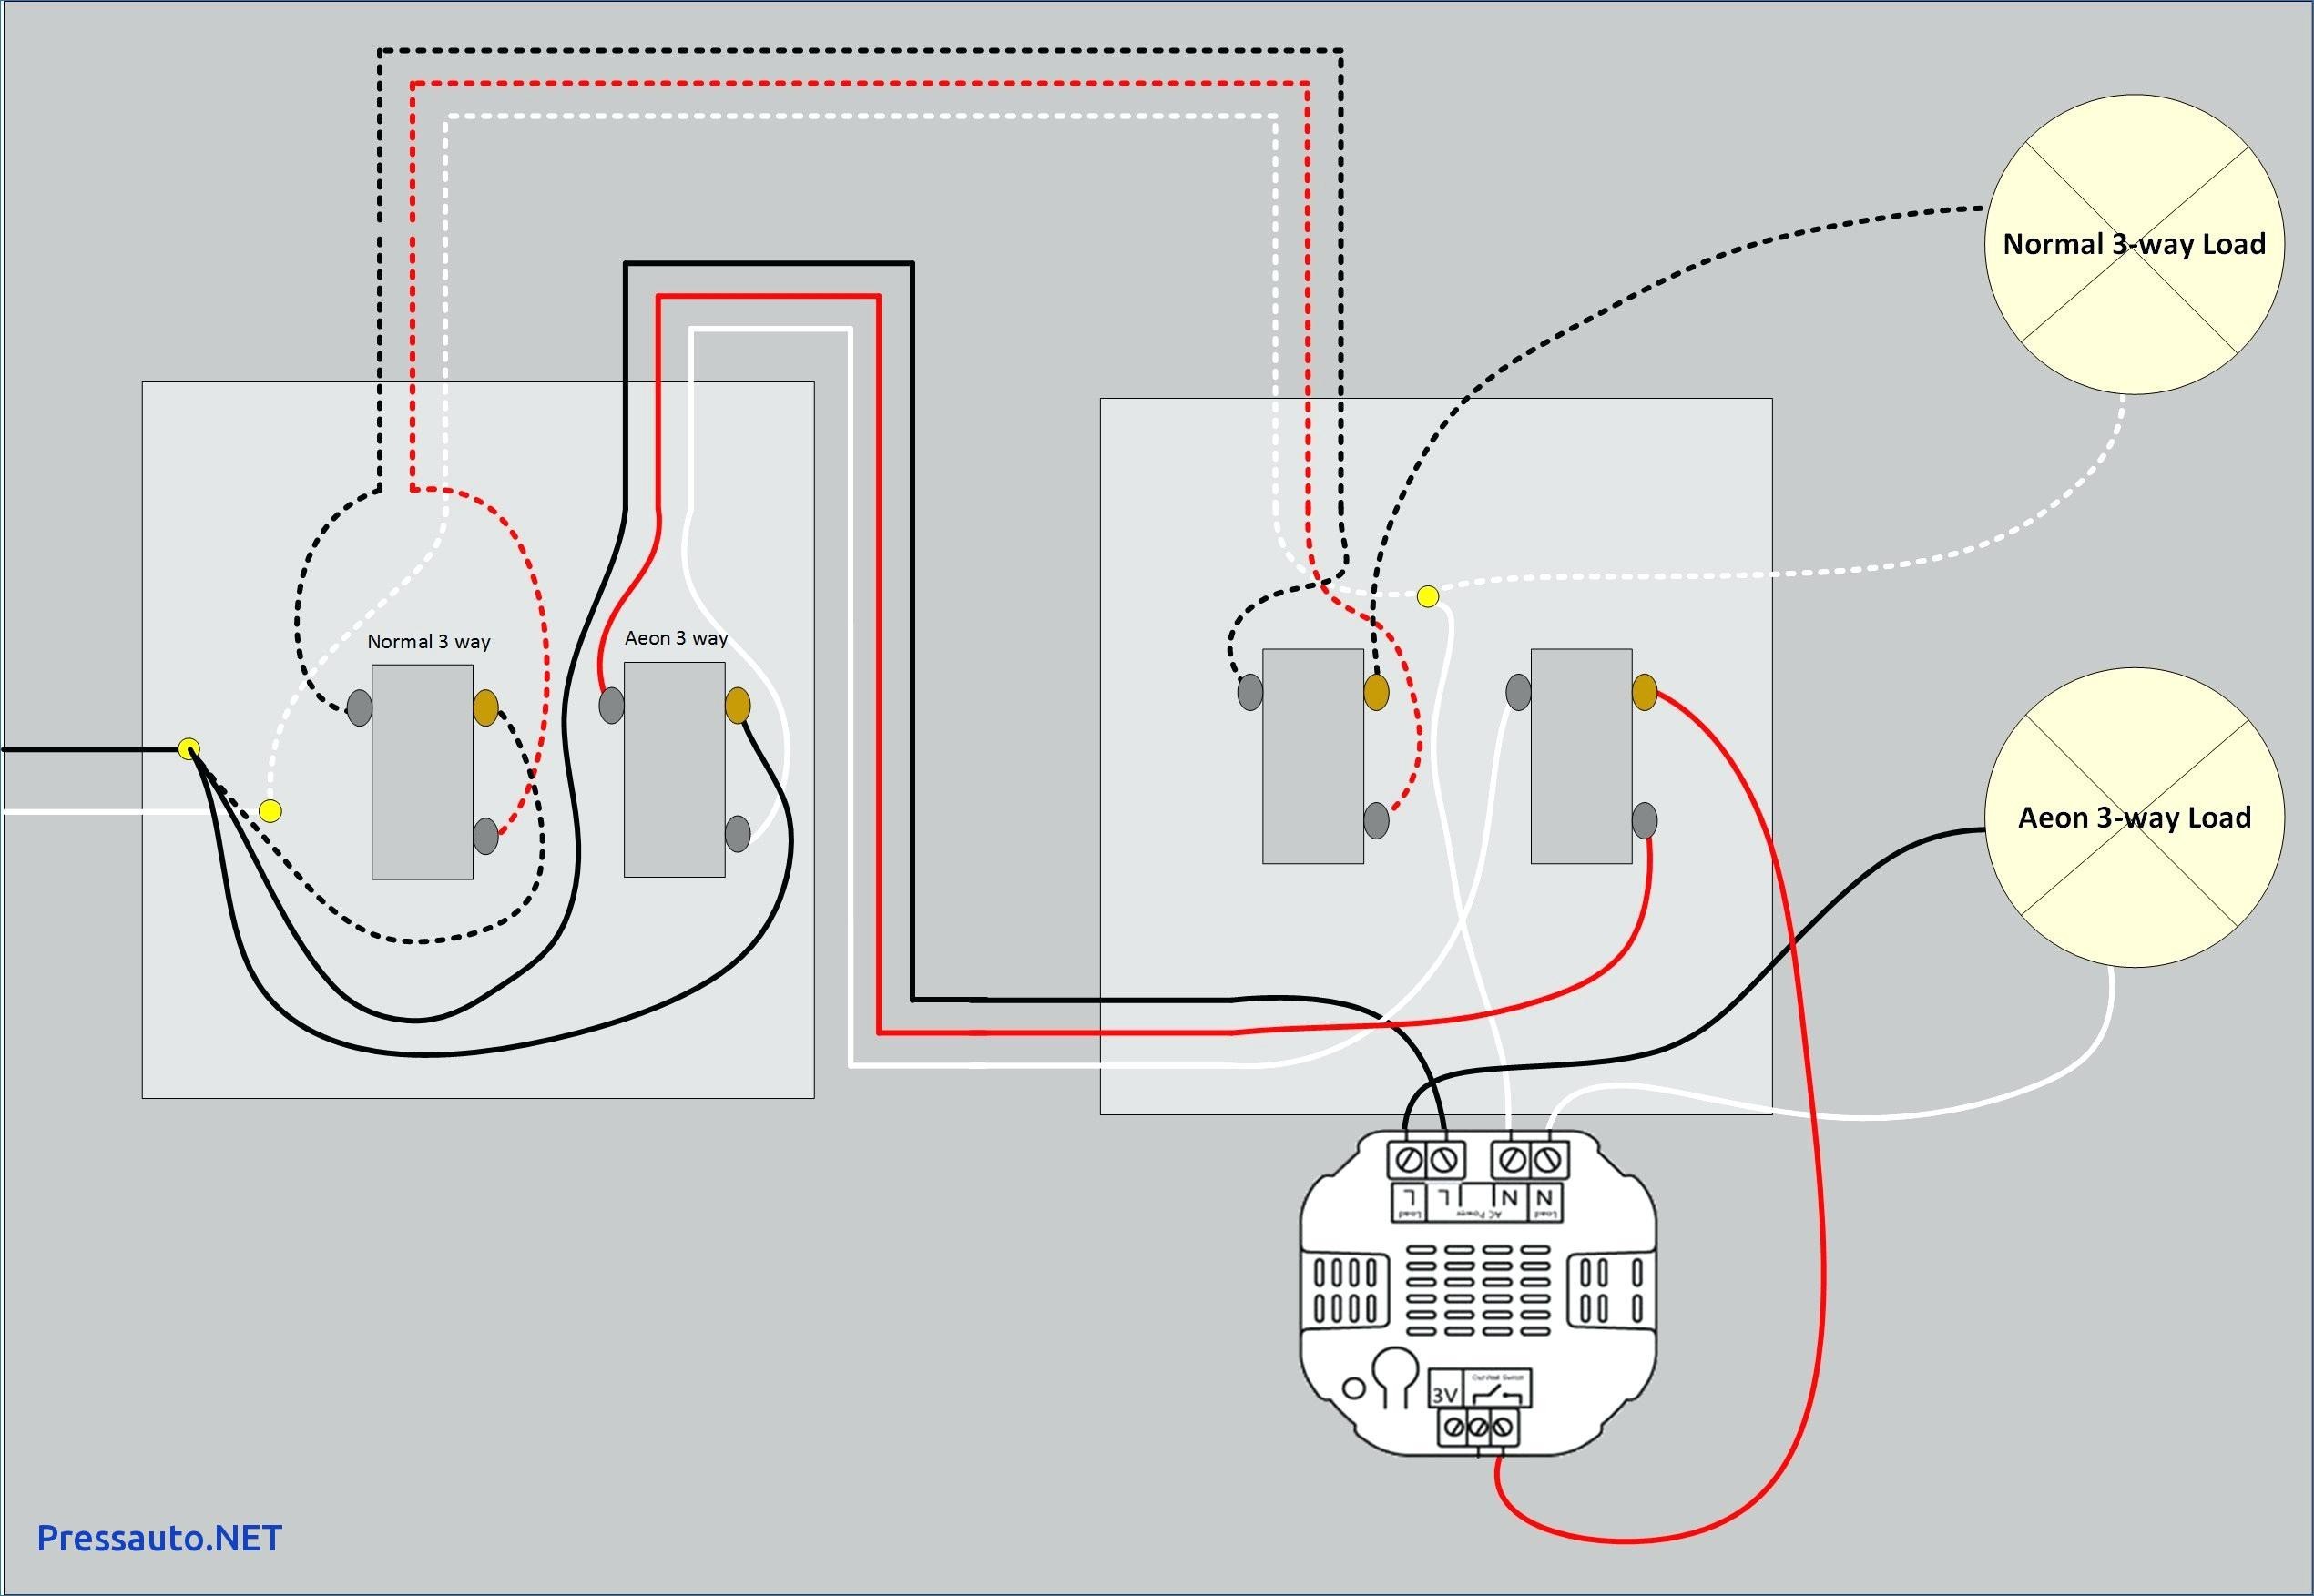 Wiring Diagram For 3 Way Switches Multiple Lights Best New 3 Way Switch Wiring Diagram Multiple Lights Wiring